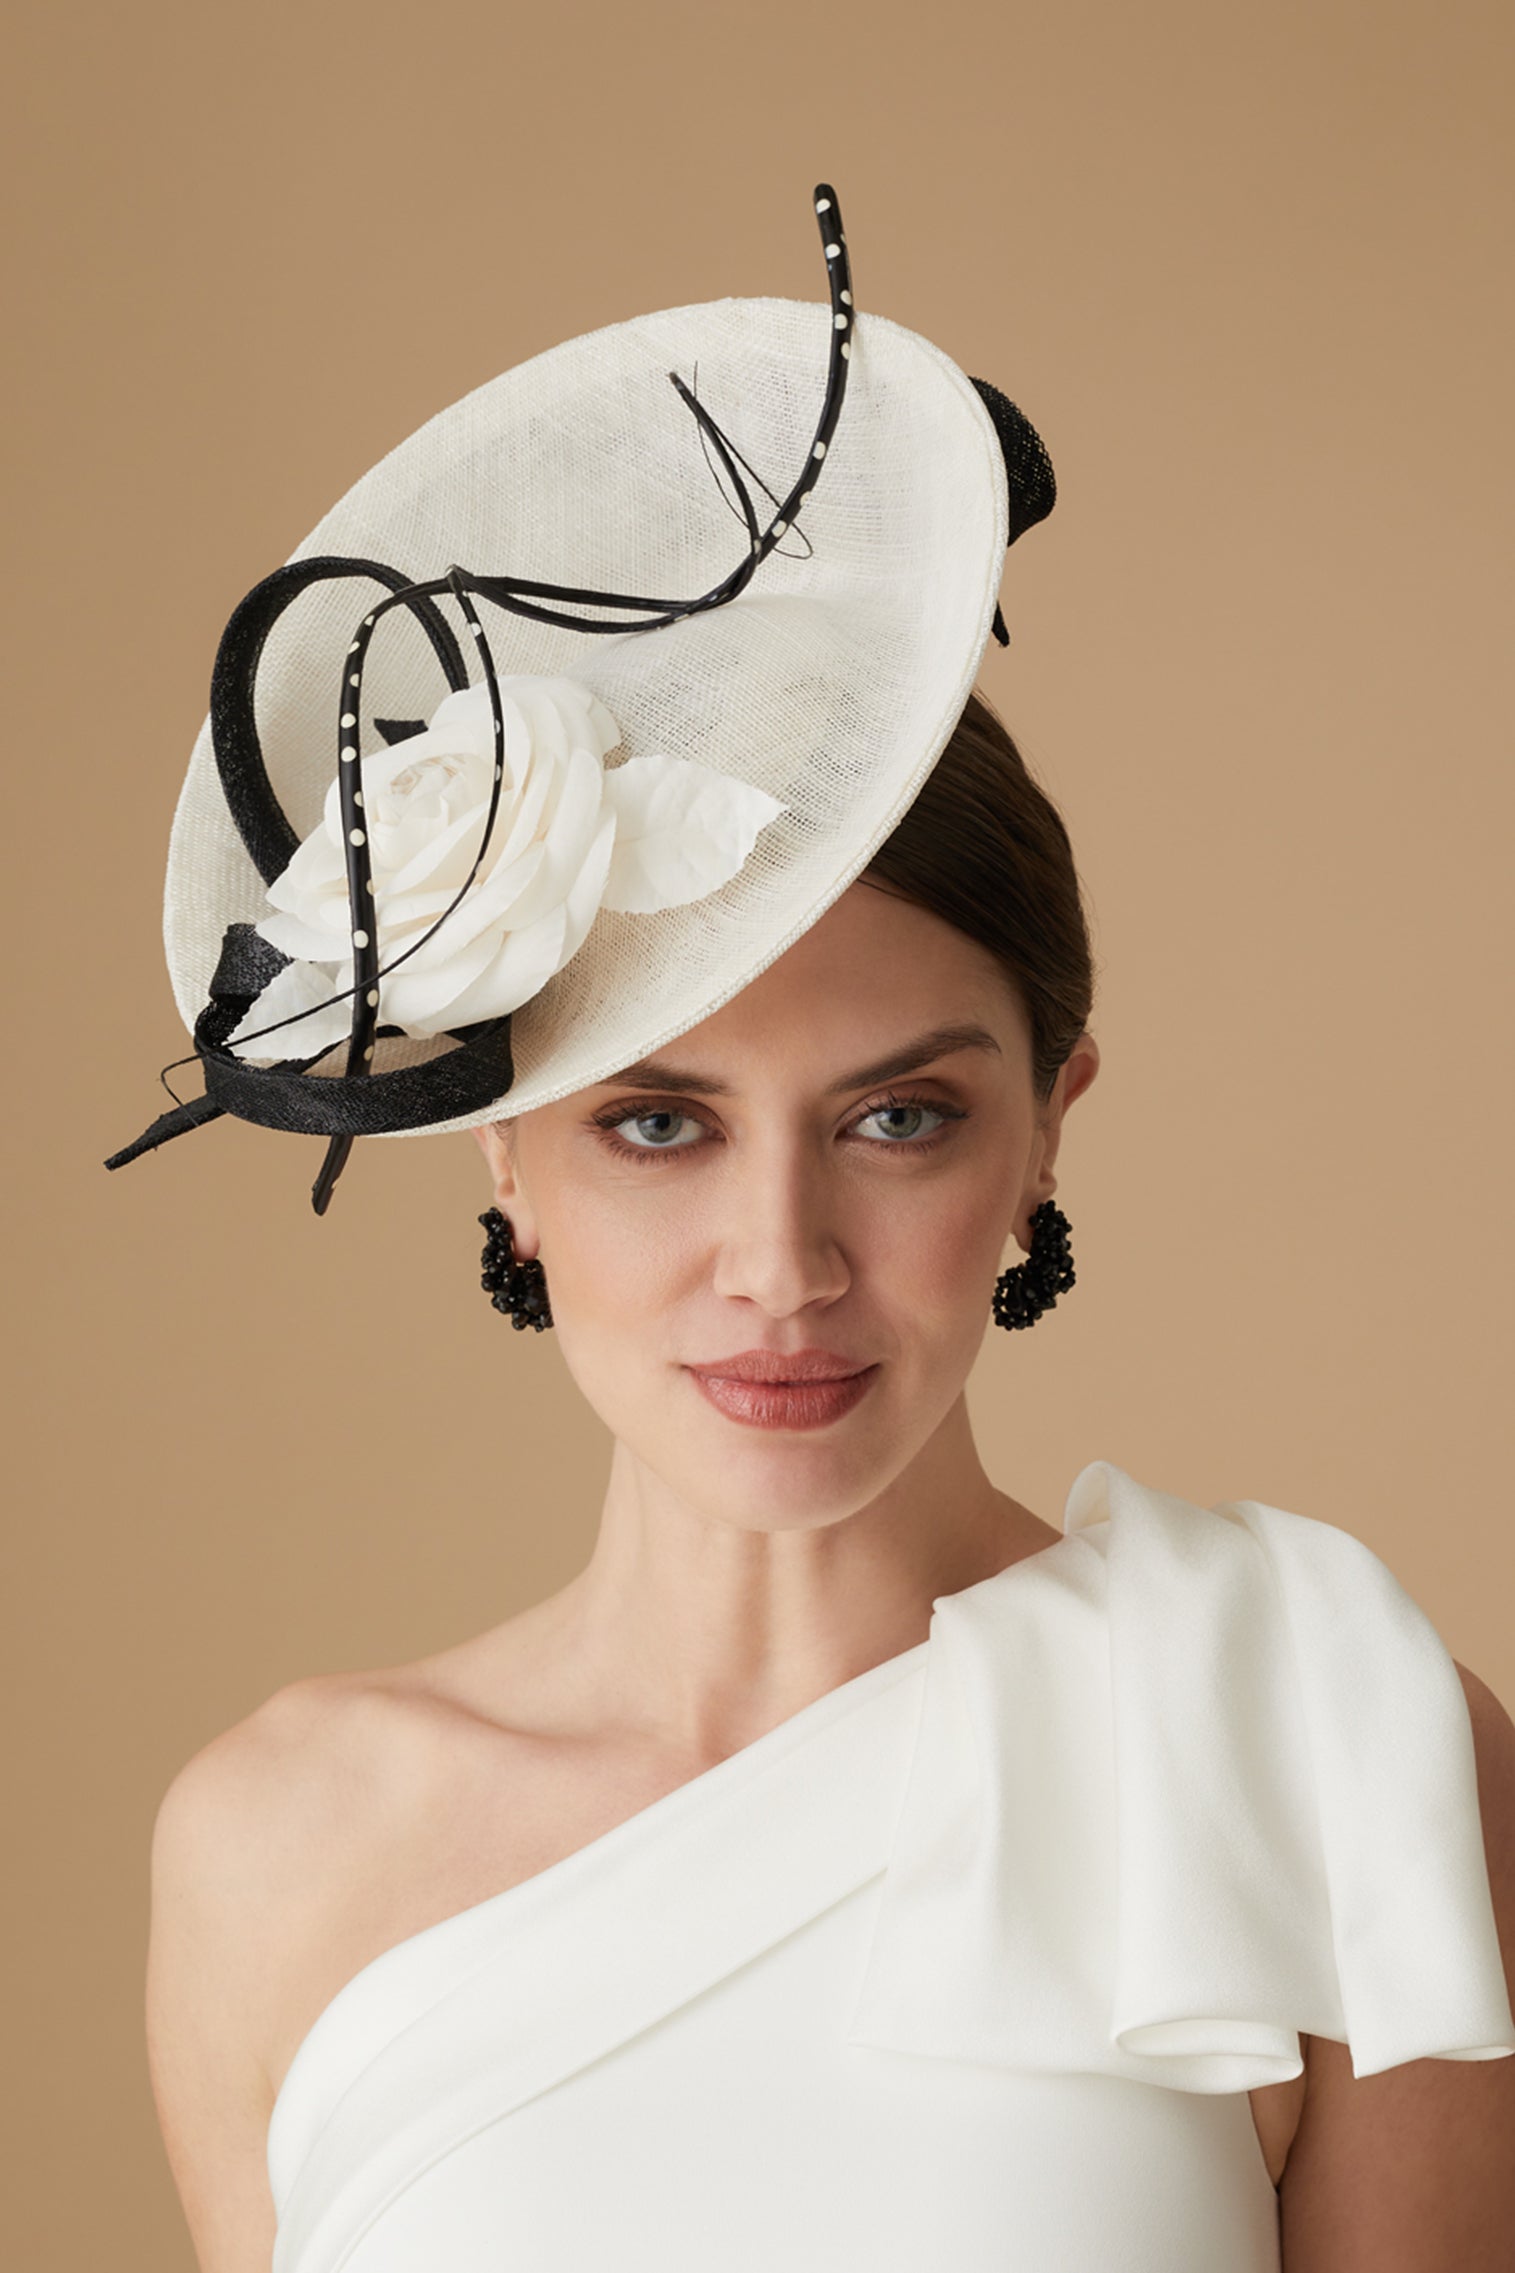 Assam White and Black Saucer Hat - New Season Hat Collection - Lock & Co. Hatters London UK